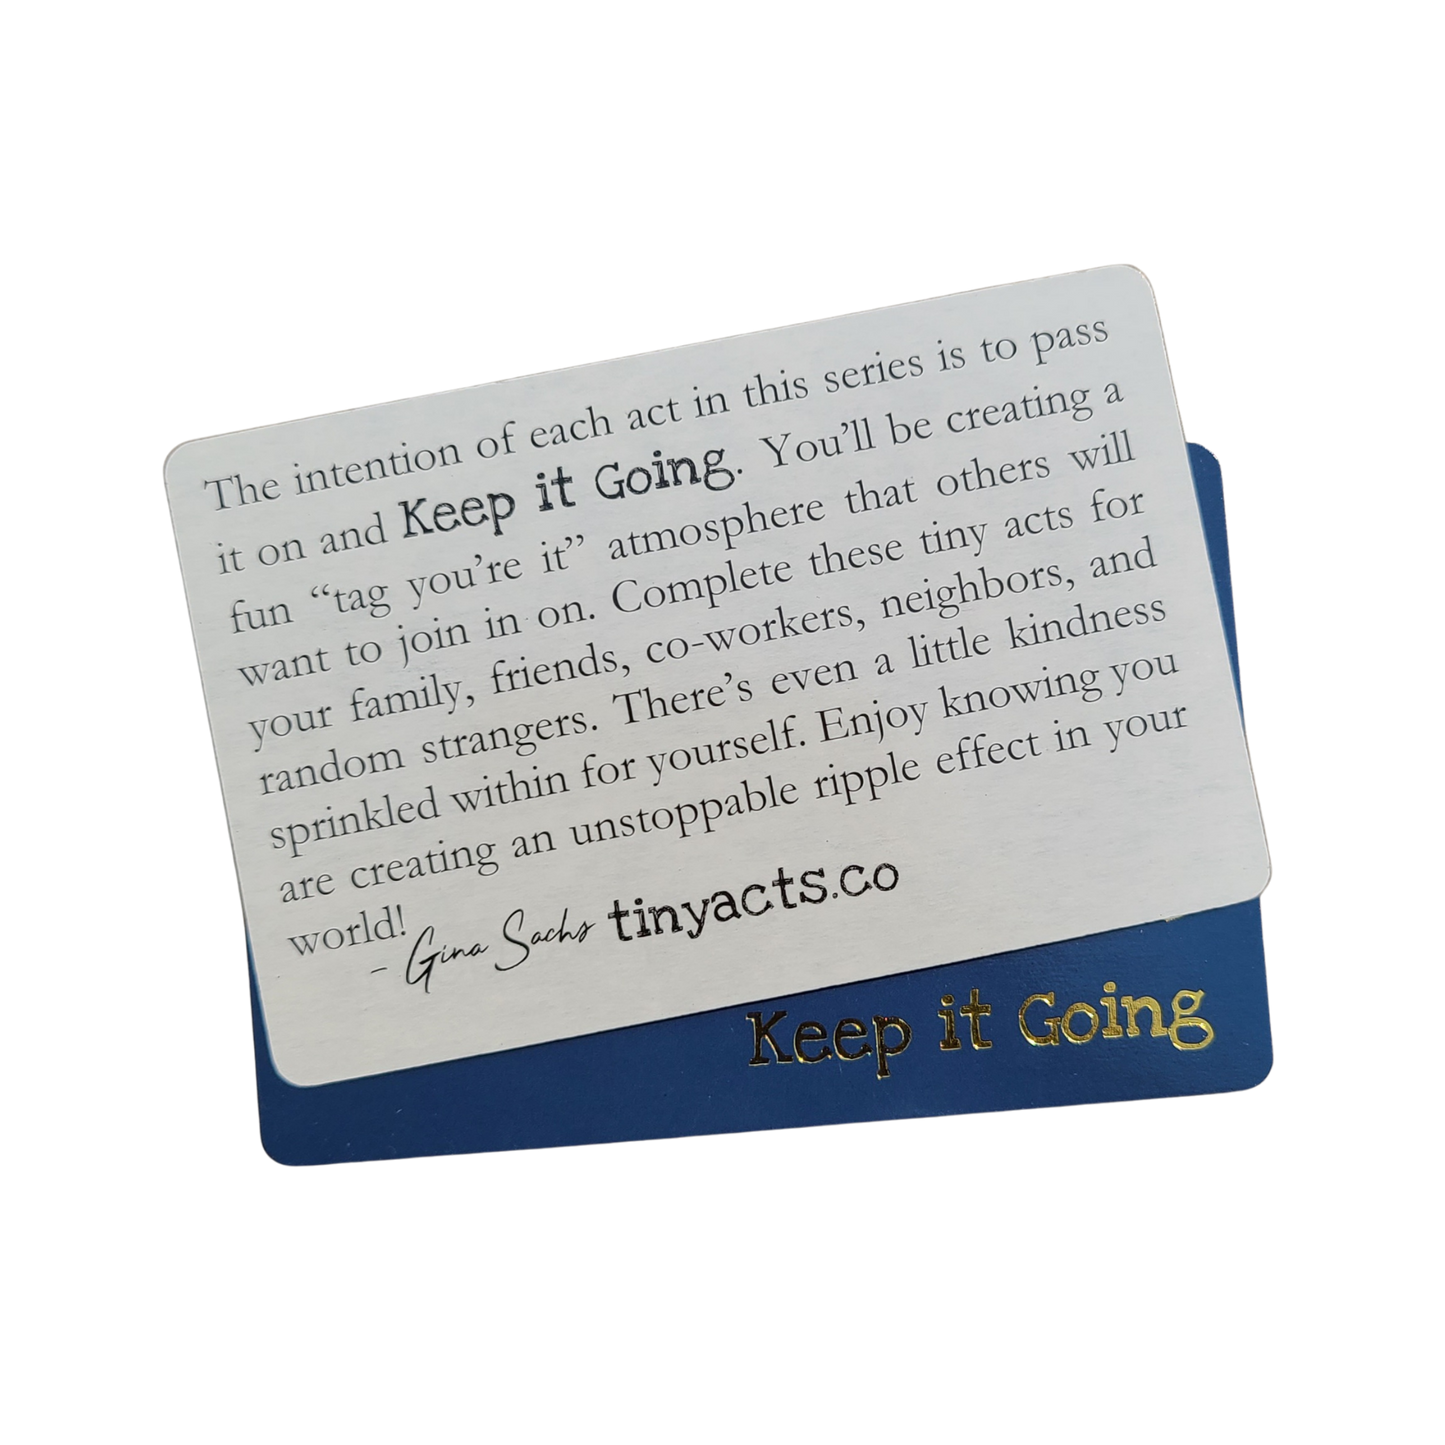 tinyacts.co, Tiny Acts of Kindness, Kindness Cards, Keep it Going